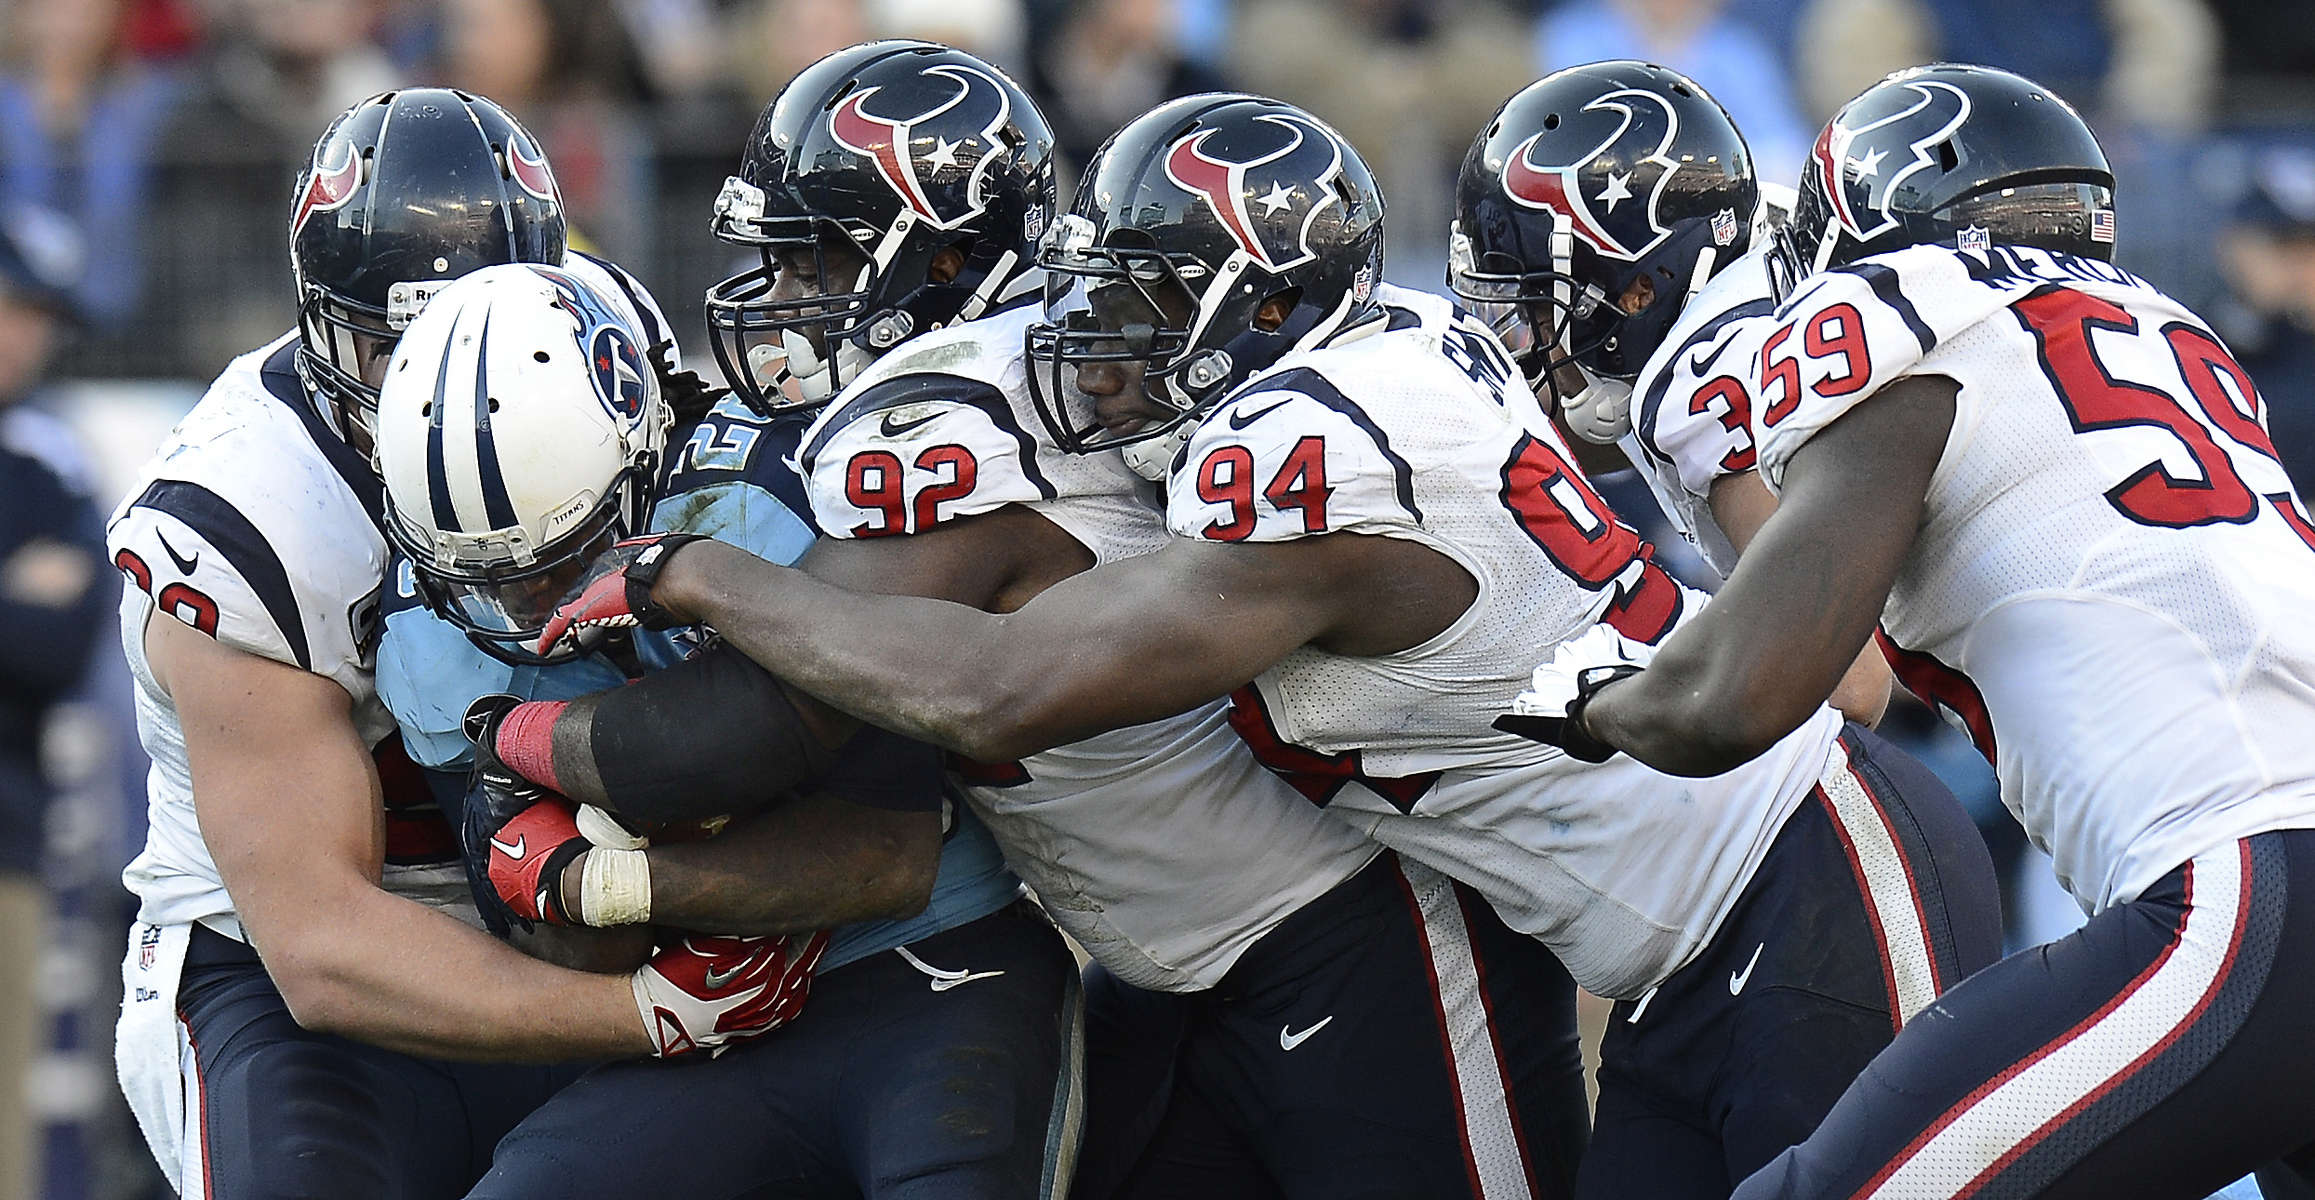 Tennessee Titans running back Chris Johnson is stoppedby Houston Texans defenders J.J. Watt, Earl Mitchell and Antonio Smith in the fourth quarter of an NFL football game on Dec. 29, 2013, in Nashville, Tenn. The Titans won 16-10. (AP Photo/ Mark Zaleski)